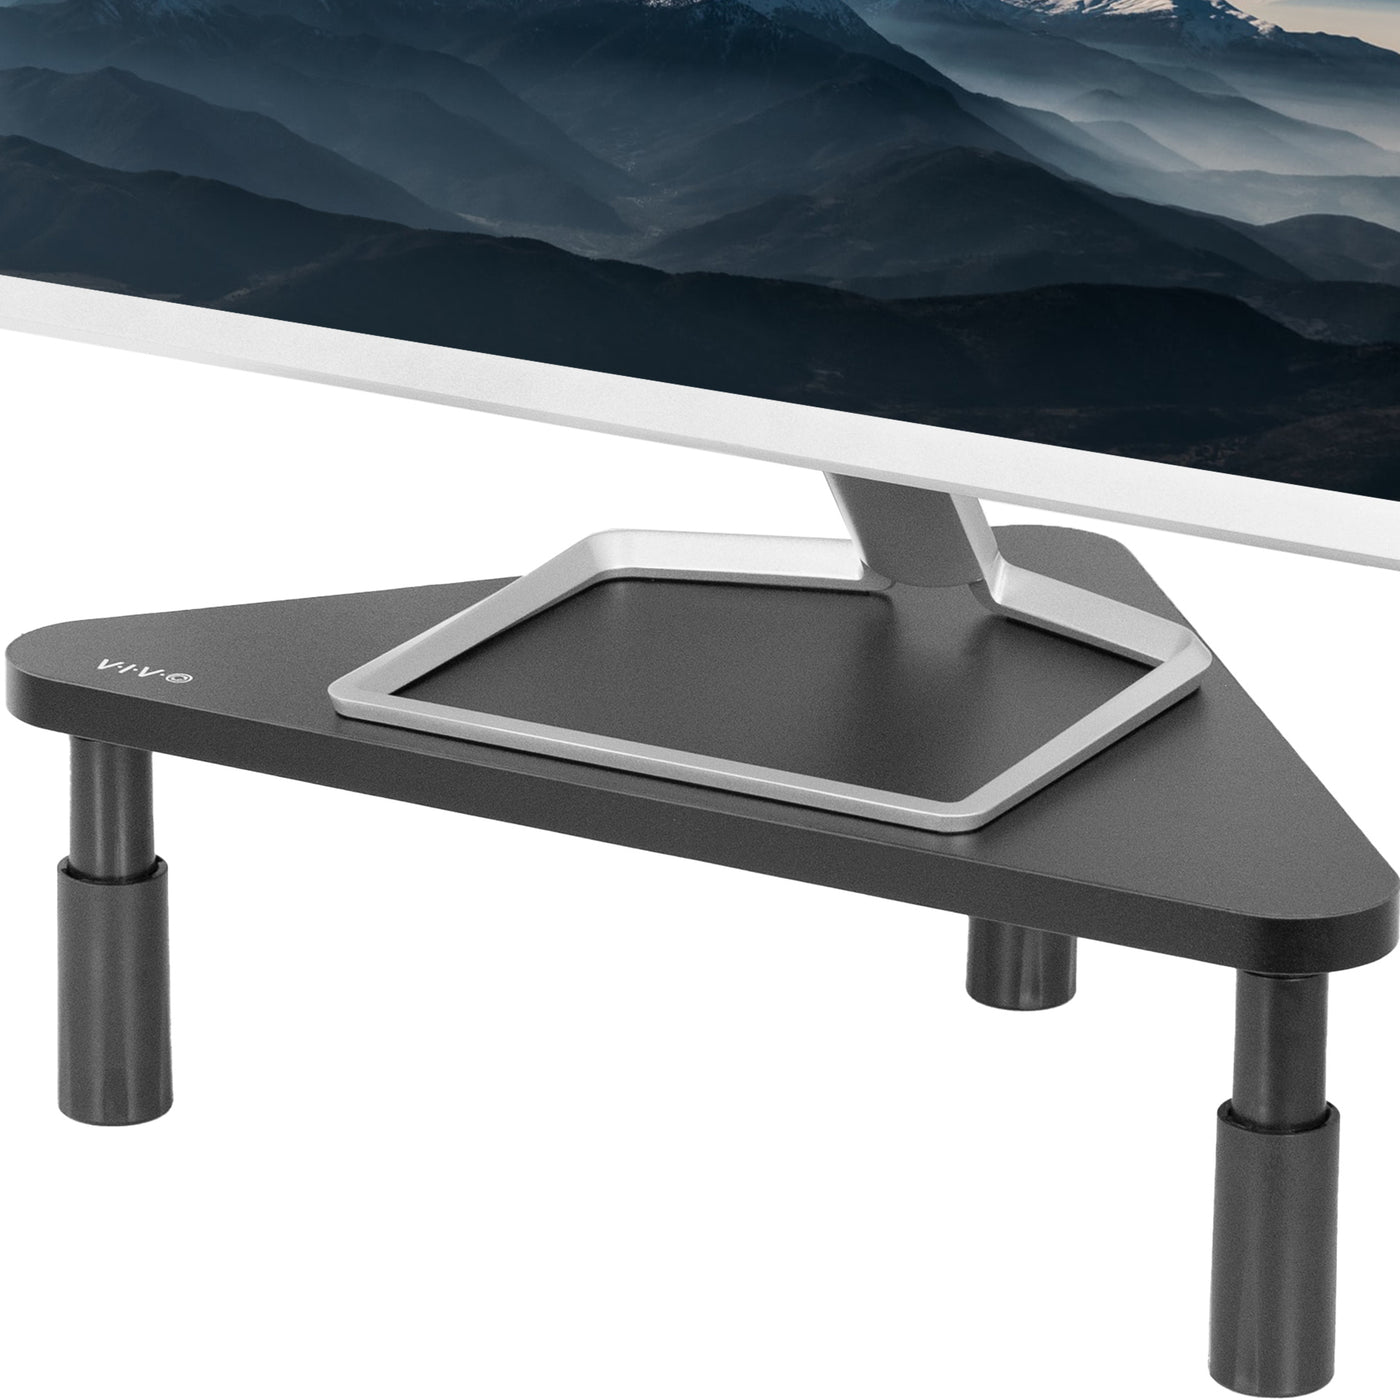 Sturdy corner tabletop monitor riser for comfortable viewing.